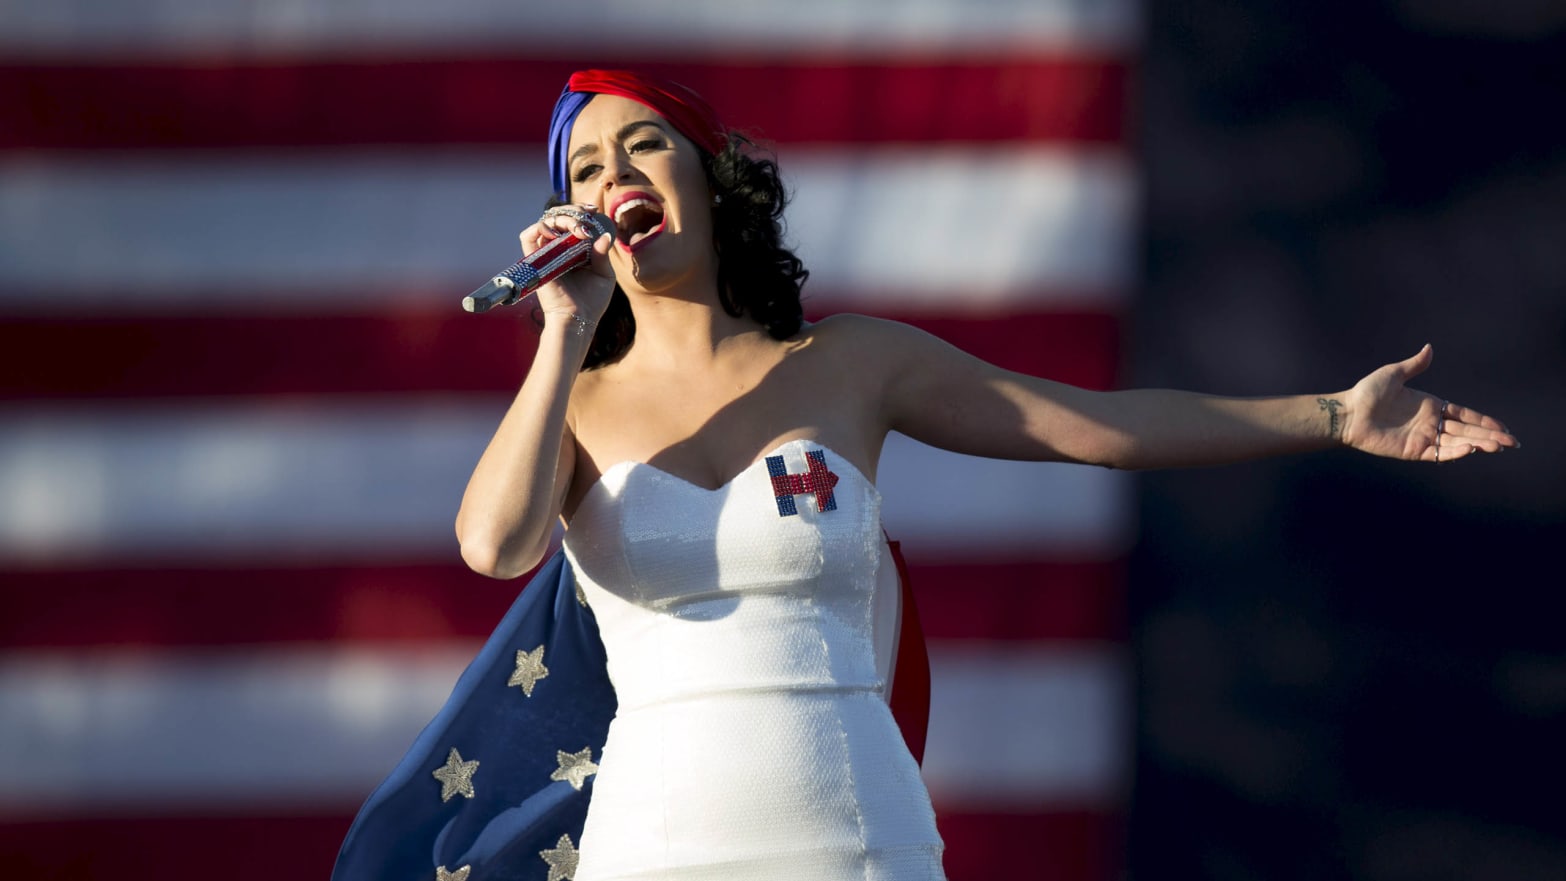 1566px x 881px - Who Crowned Katy Perry Queen of the Resistance?